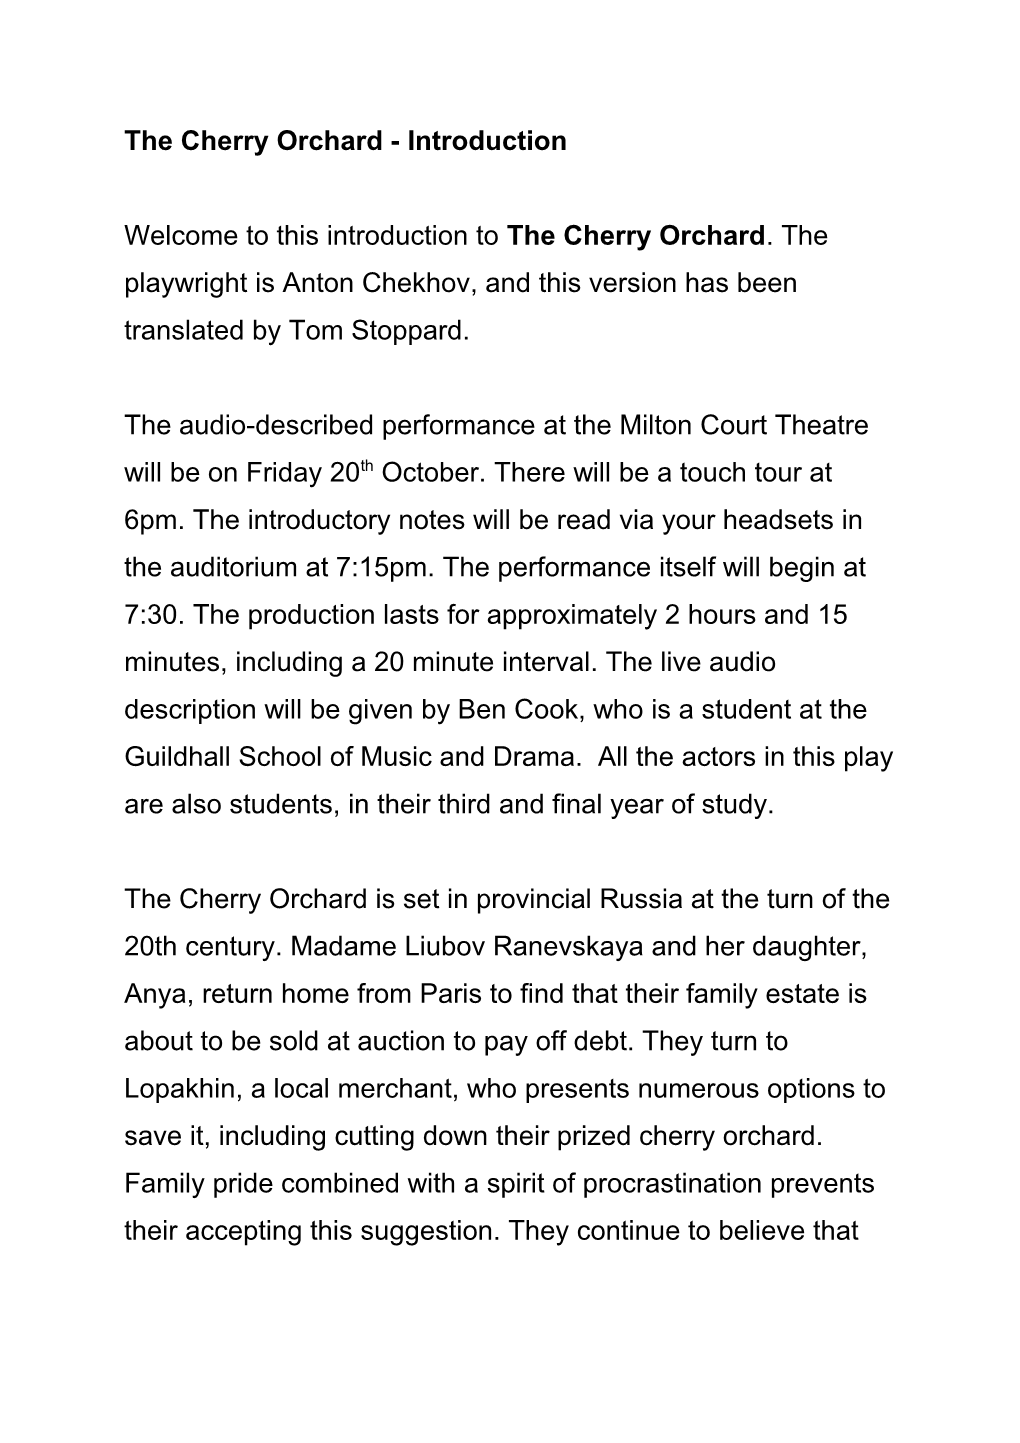 The Cherry Orchard - Introduction